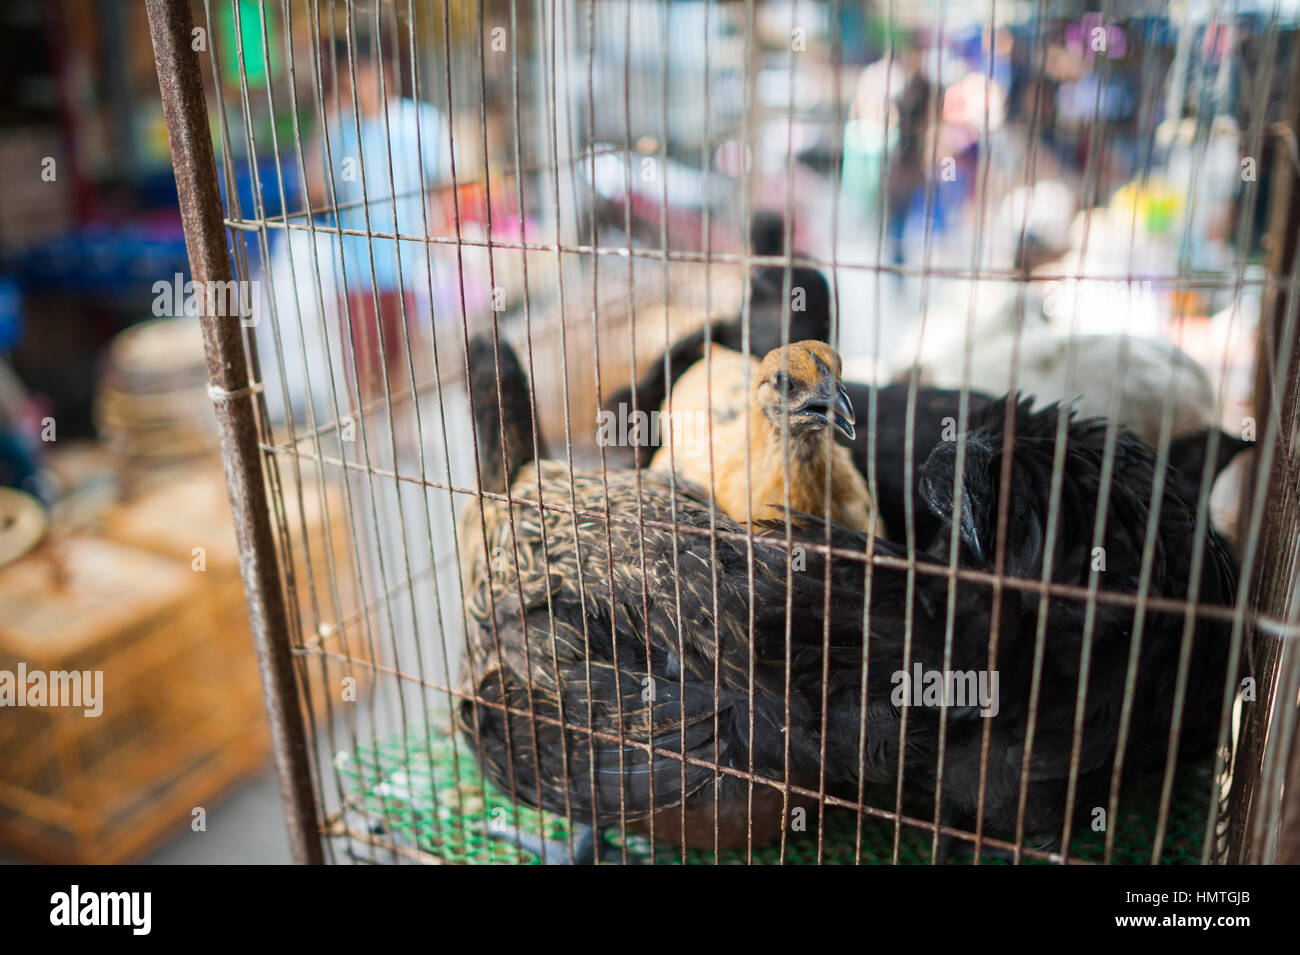 Birds in cages for sale. Chatuchak market, Bangkok Stock Photo